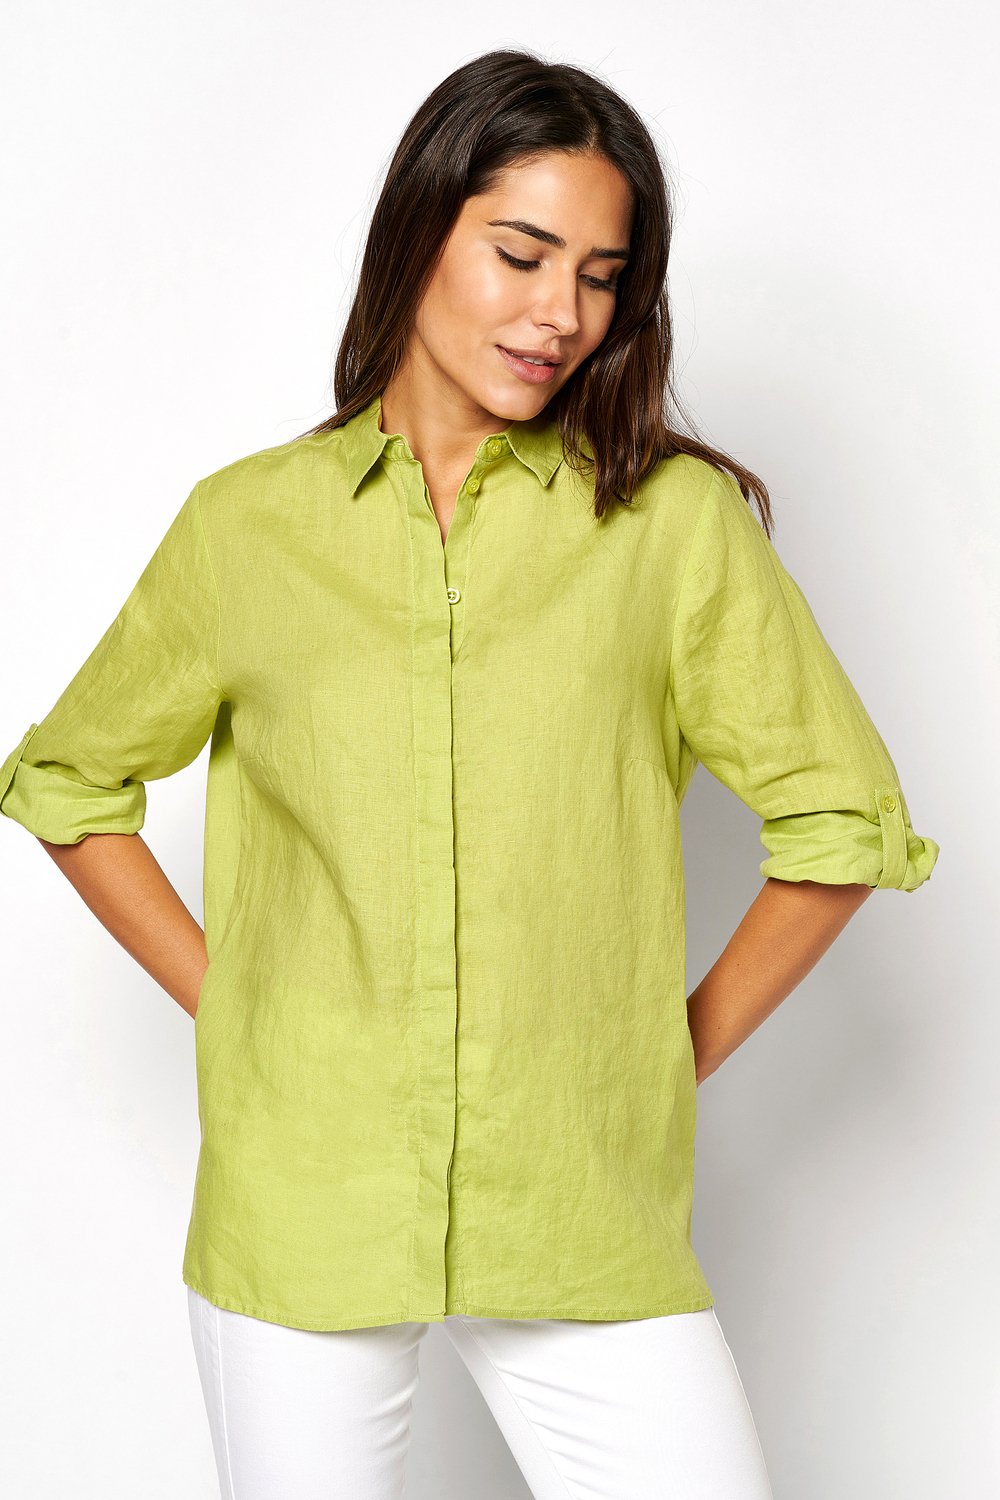 Casual linen blouse | Style »Clay« apple